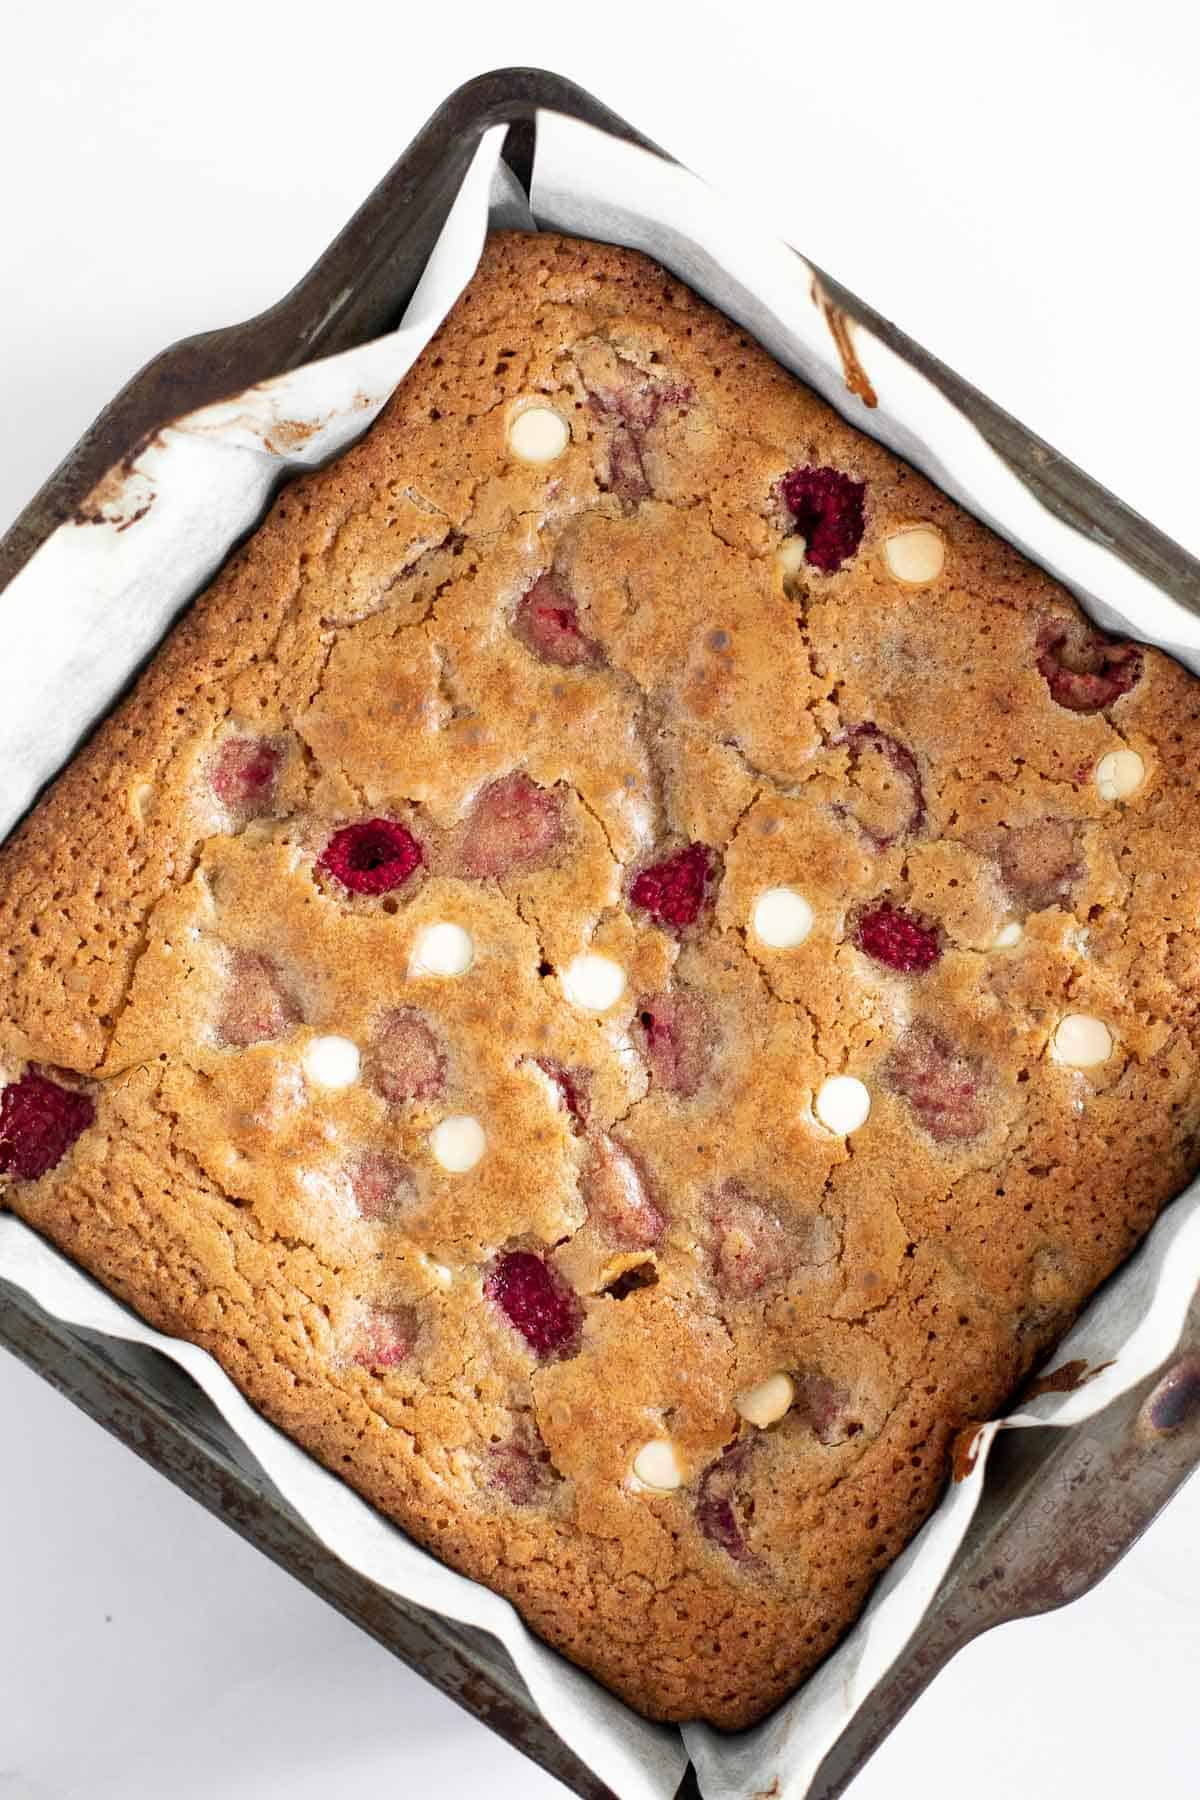 Baked blondies with white chocolate chips and raspberries in a metal baking pan.